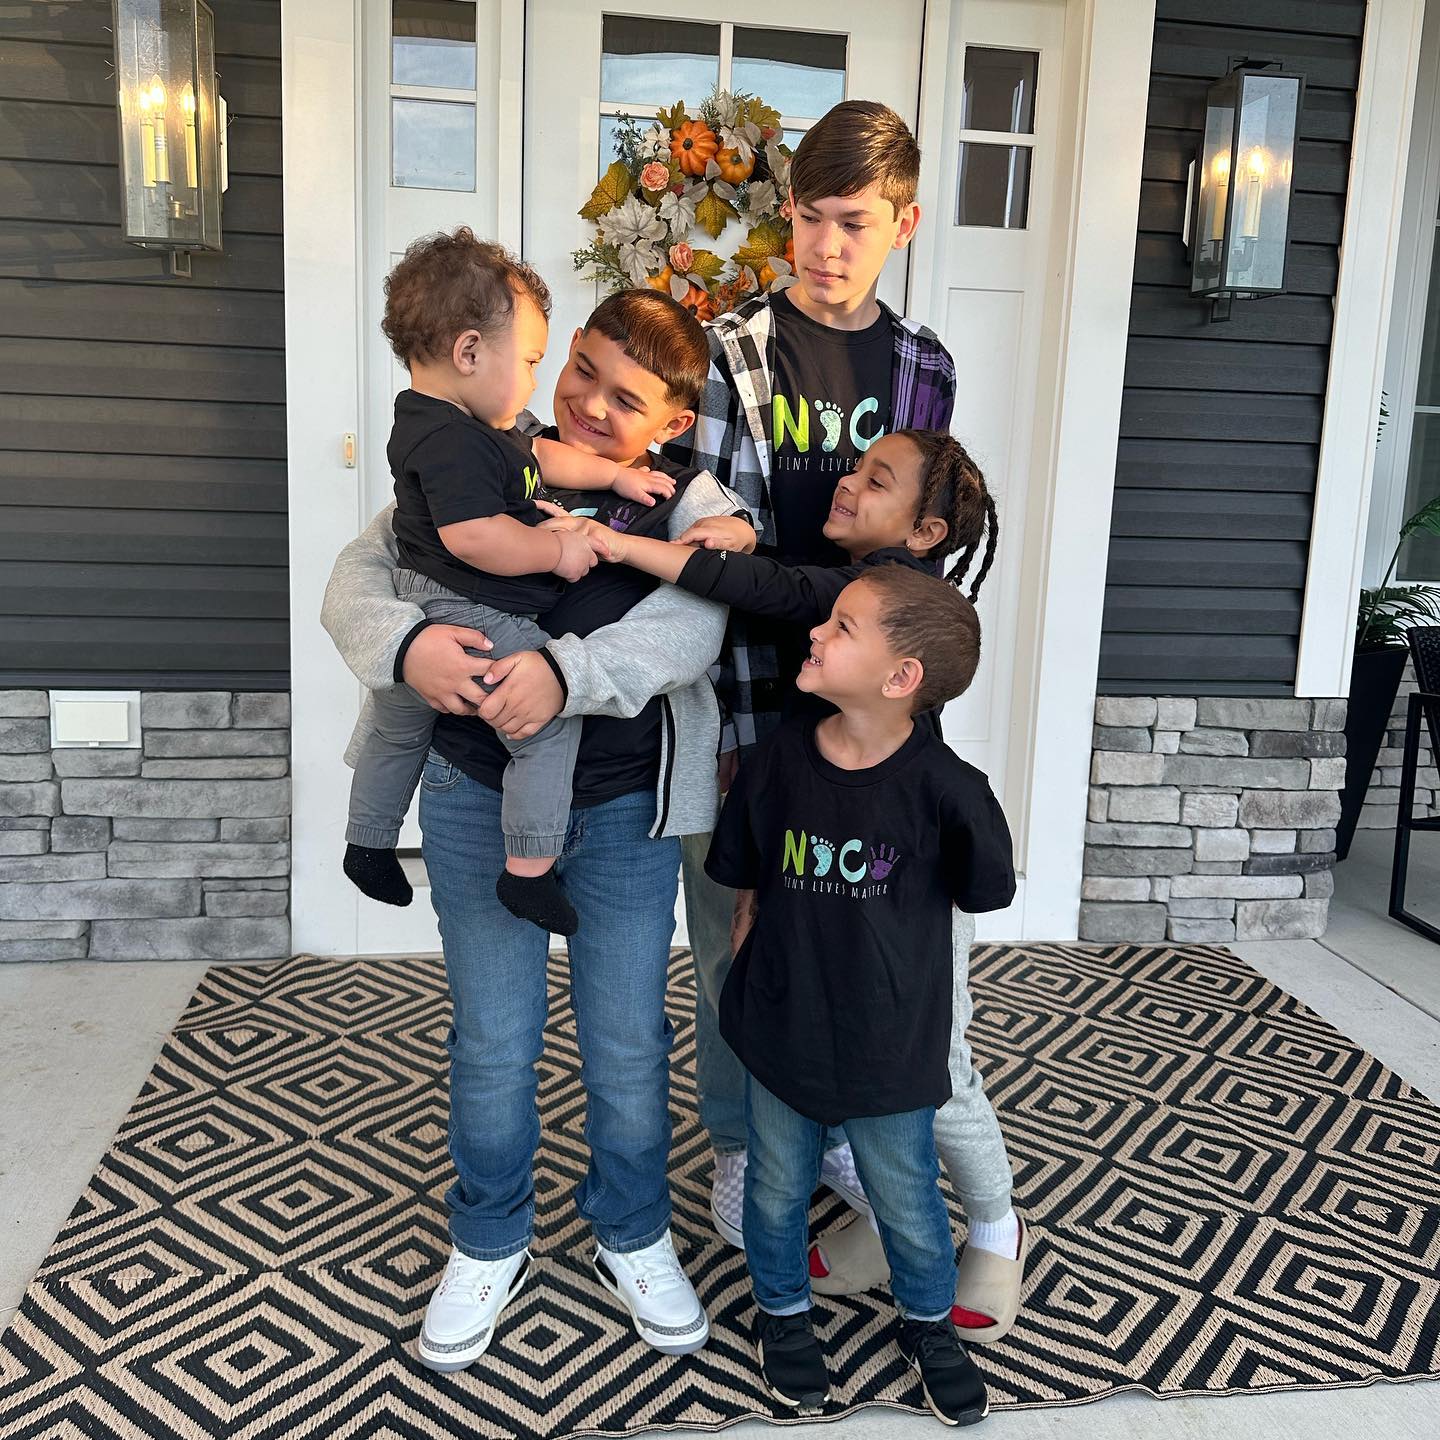 Kailyn is also a mom to five sons: Isaac, Lincoln, Lux, Creed, and Rio